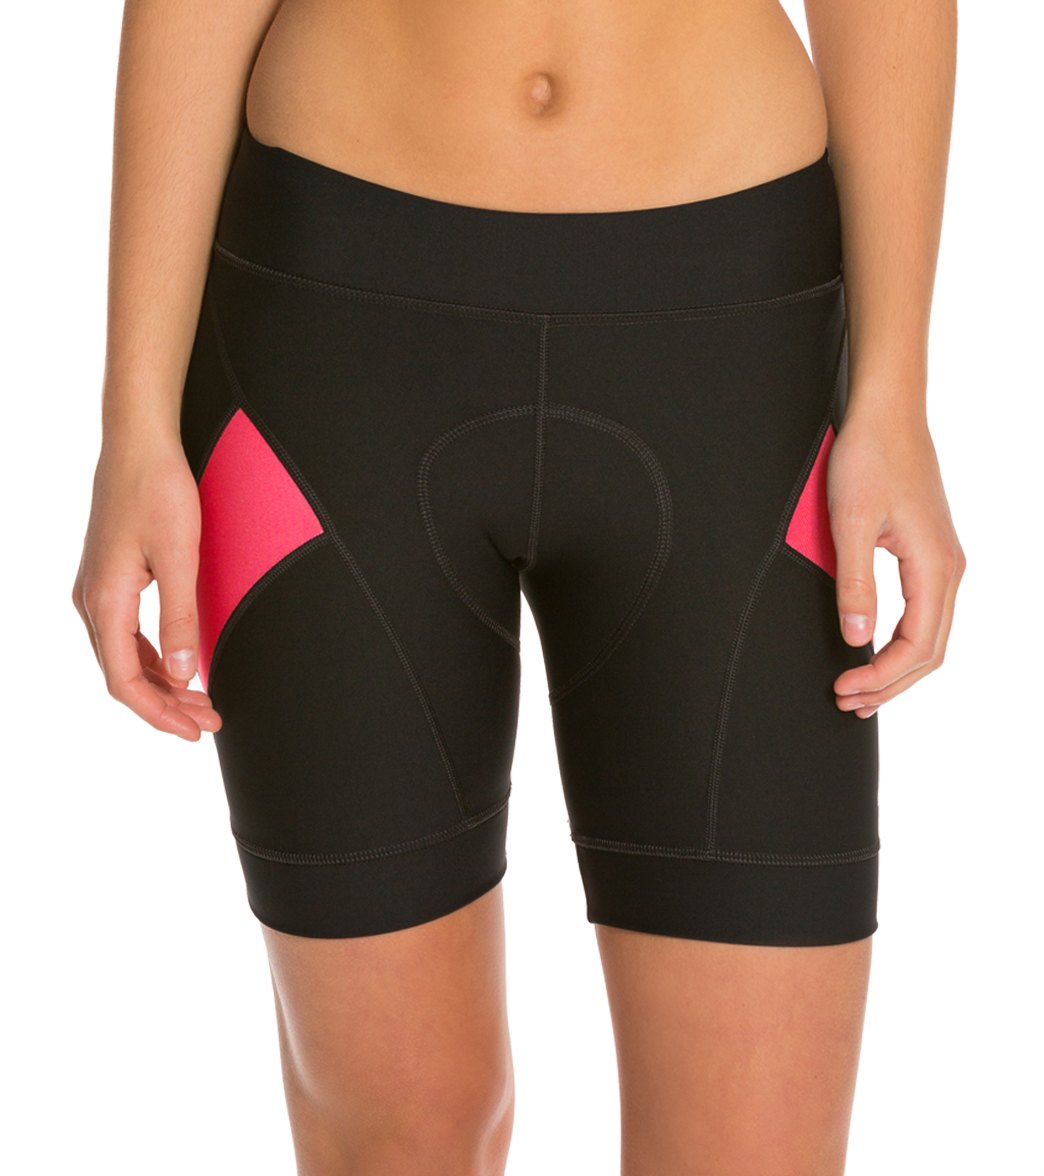 Shebeest Women's Pro Splice Cycling Shorts at SwimOutlet.com - Free ...